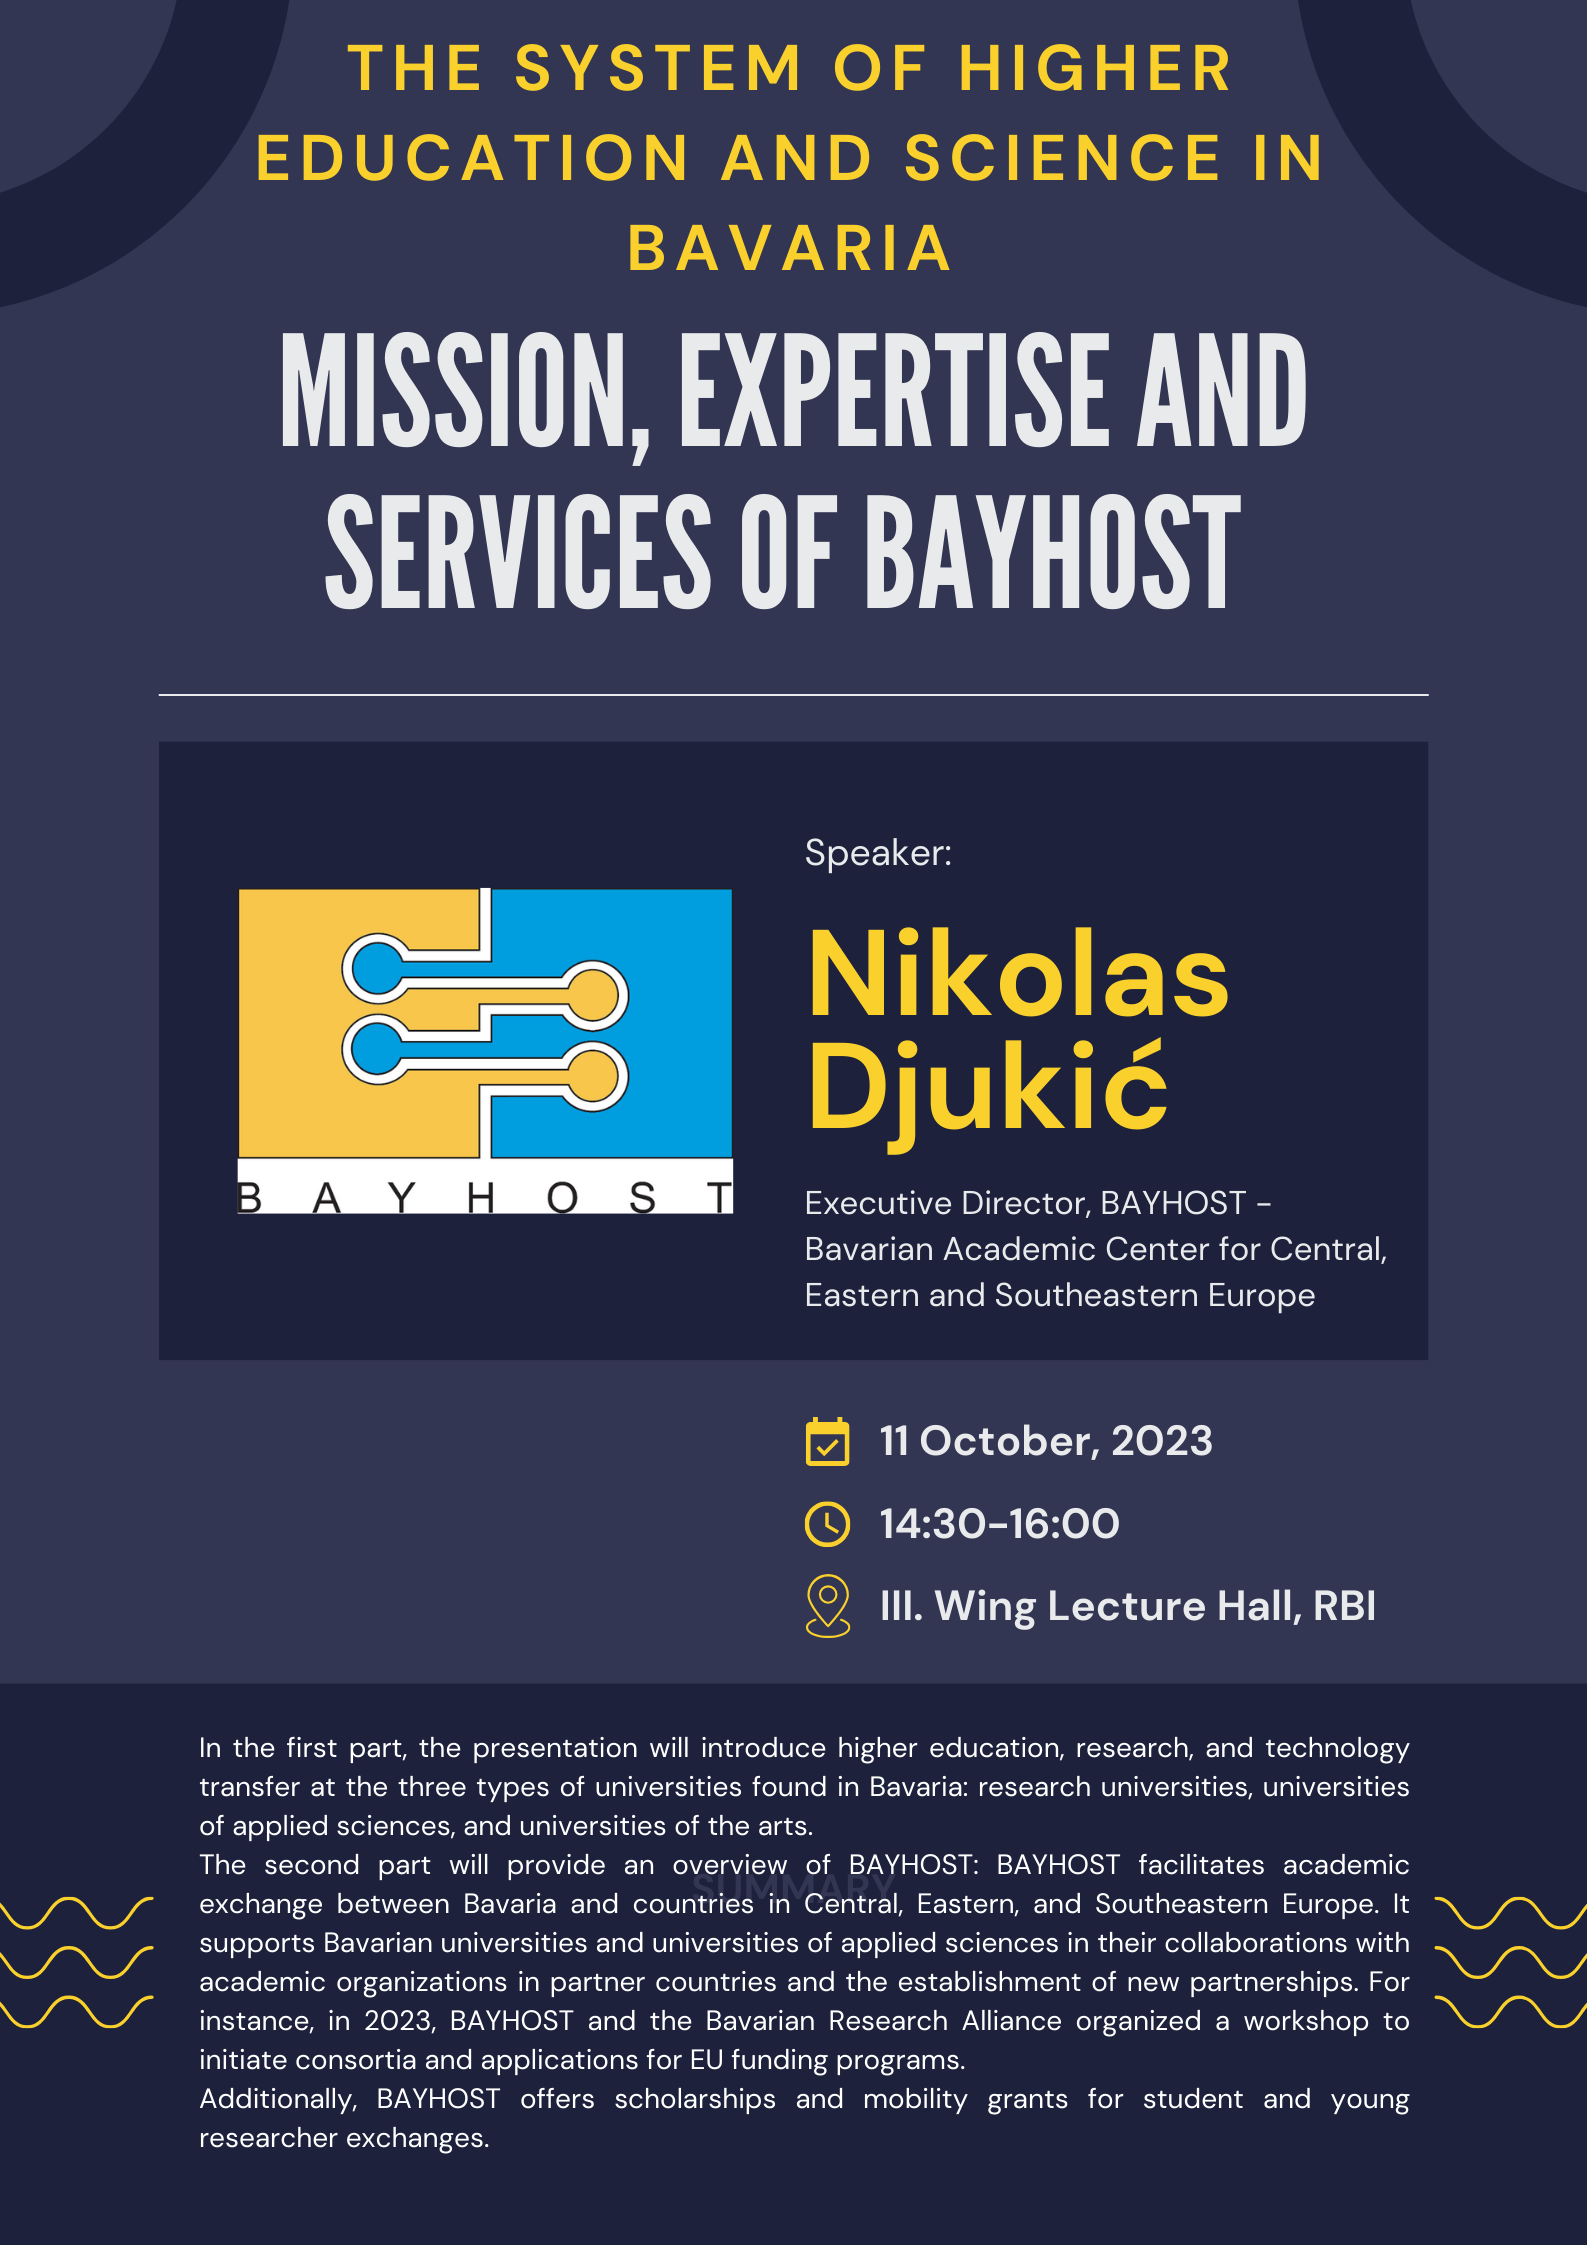 Nikolas Djukić: The system of higher education and science in Bavaria - Mission, expertise and services of BAYHOST